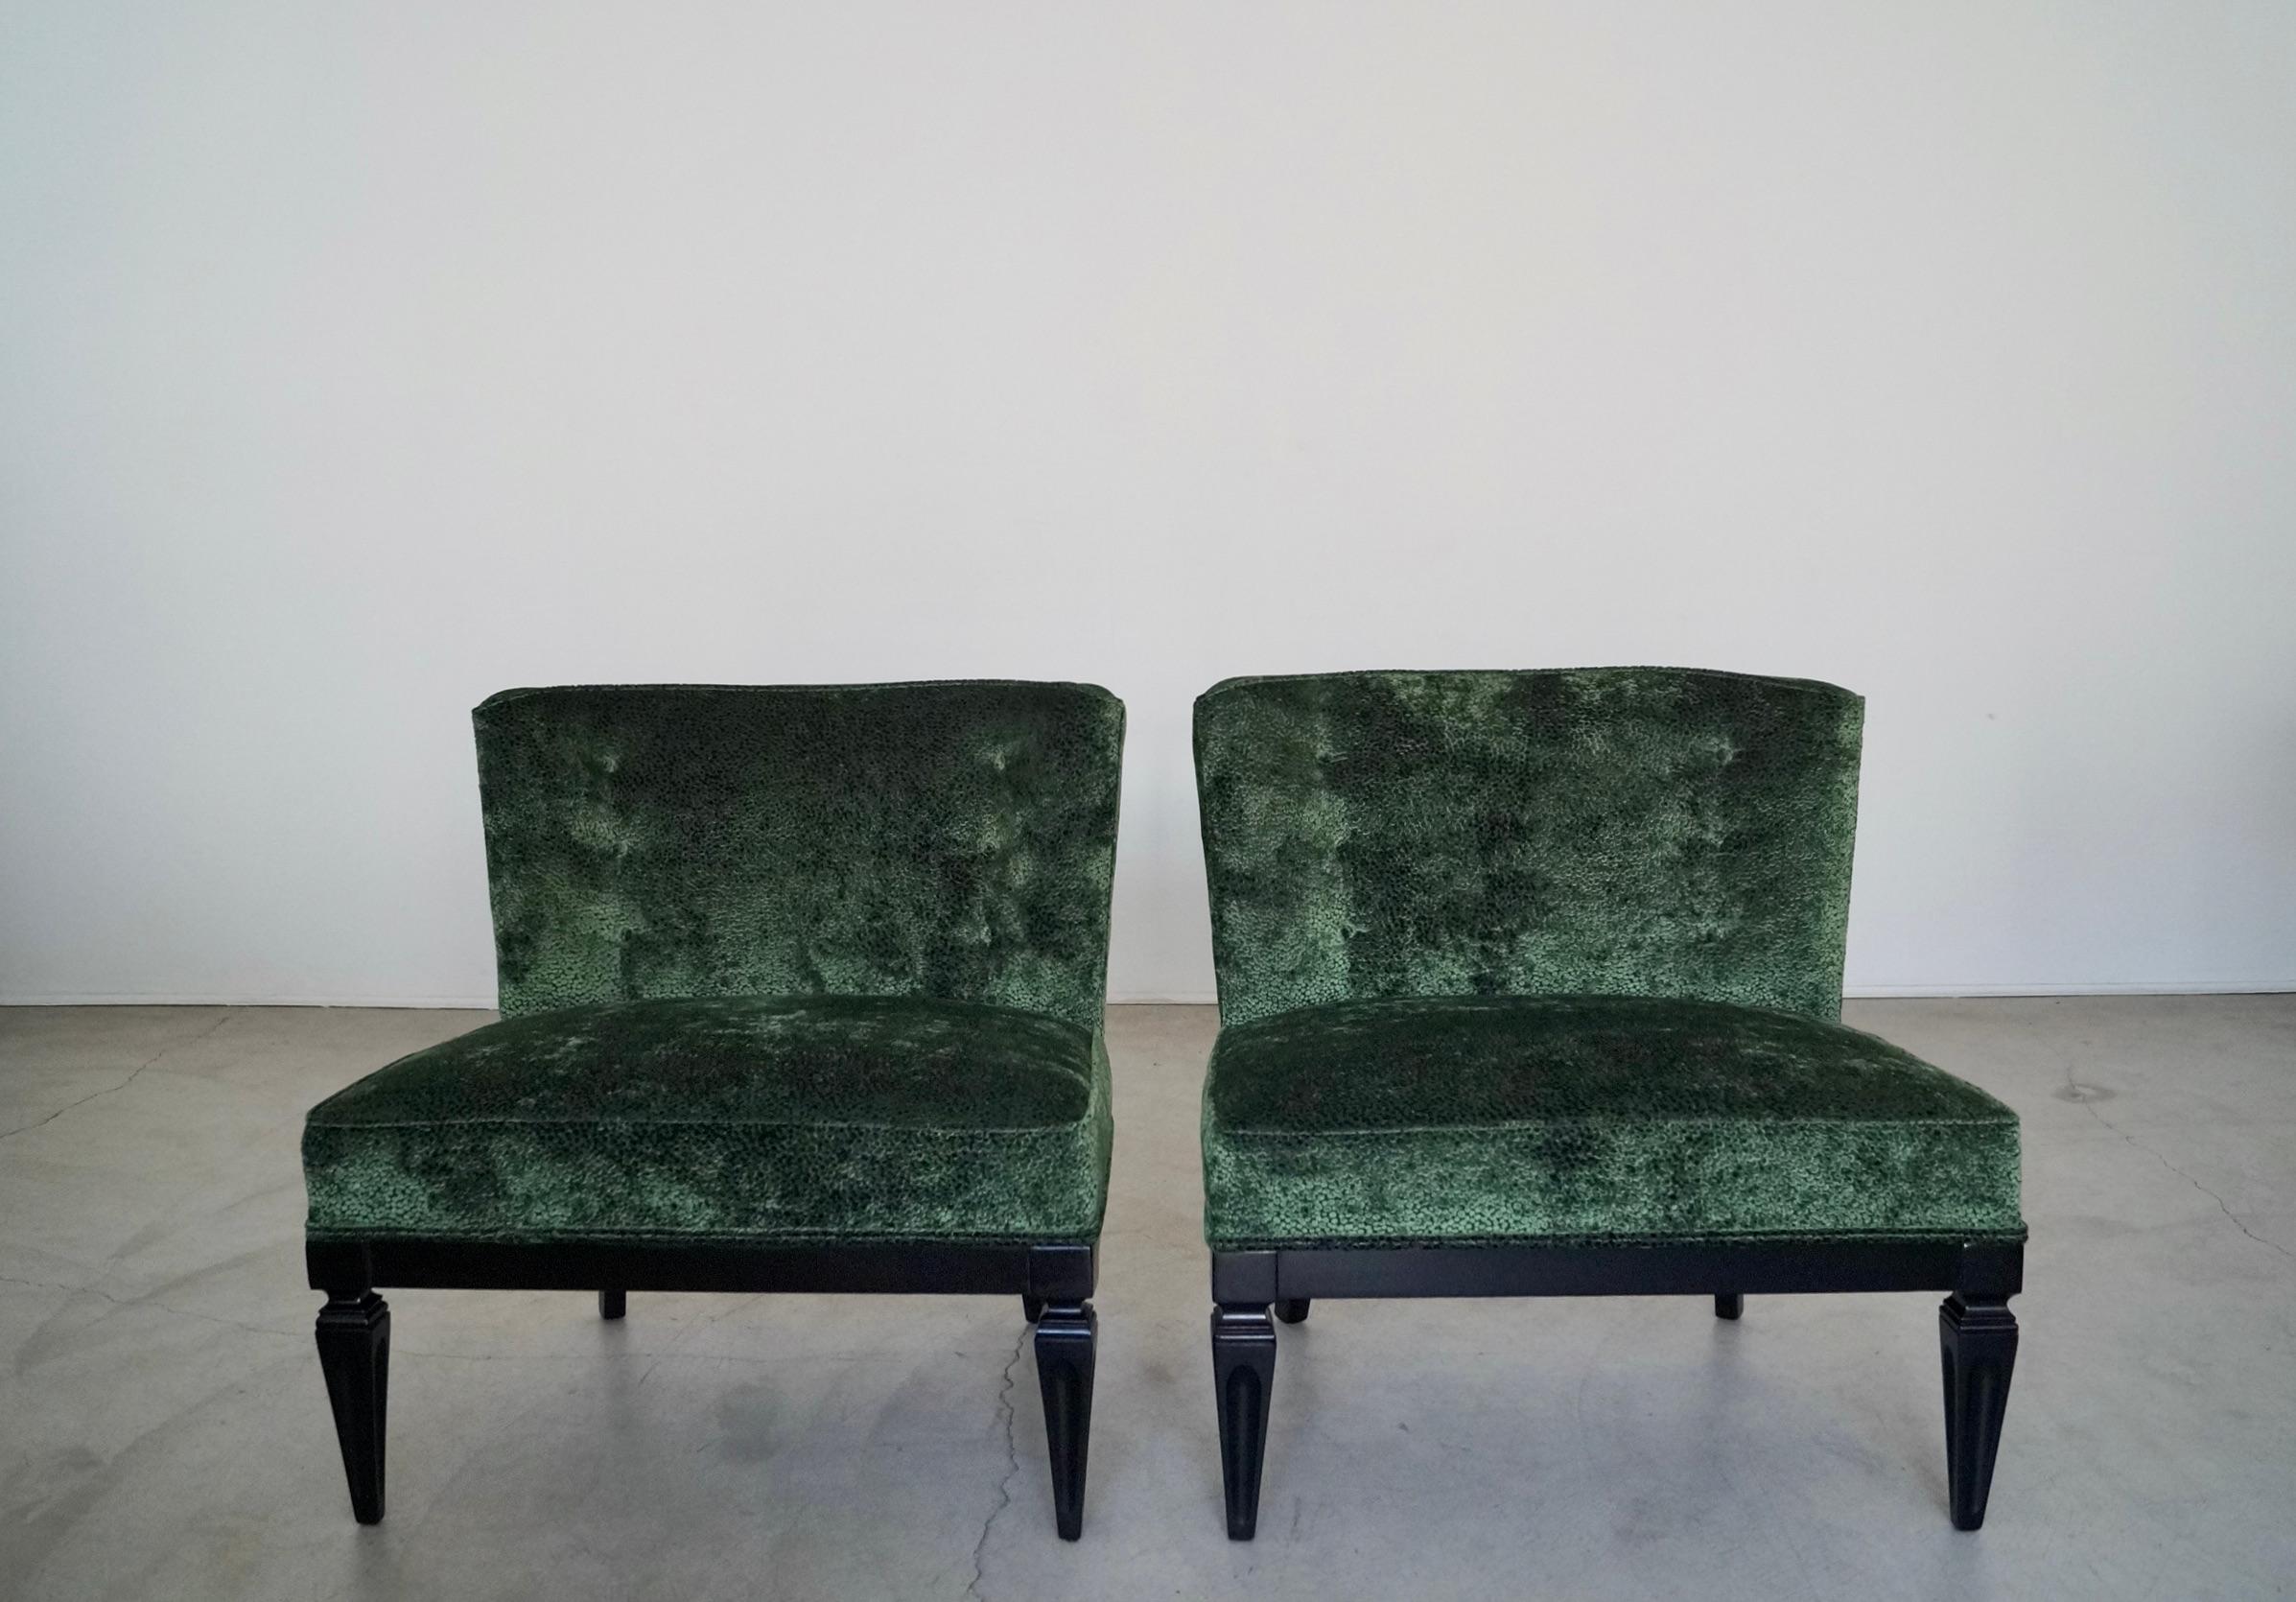 Vintage 1960's Hollywood Regency slipper chairs for sale. They have a solid wood base that have been refinished in black, and have been reupholstered in a high-end velvet by Robert Allen in emerald with an incredible texture. The velvet has a nice